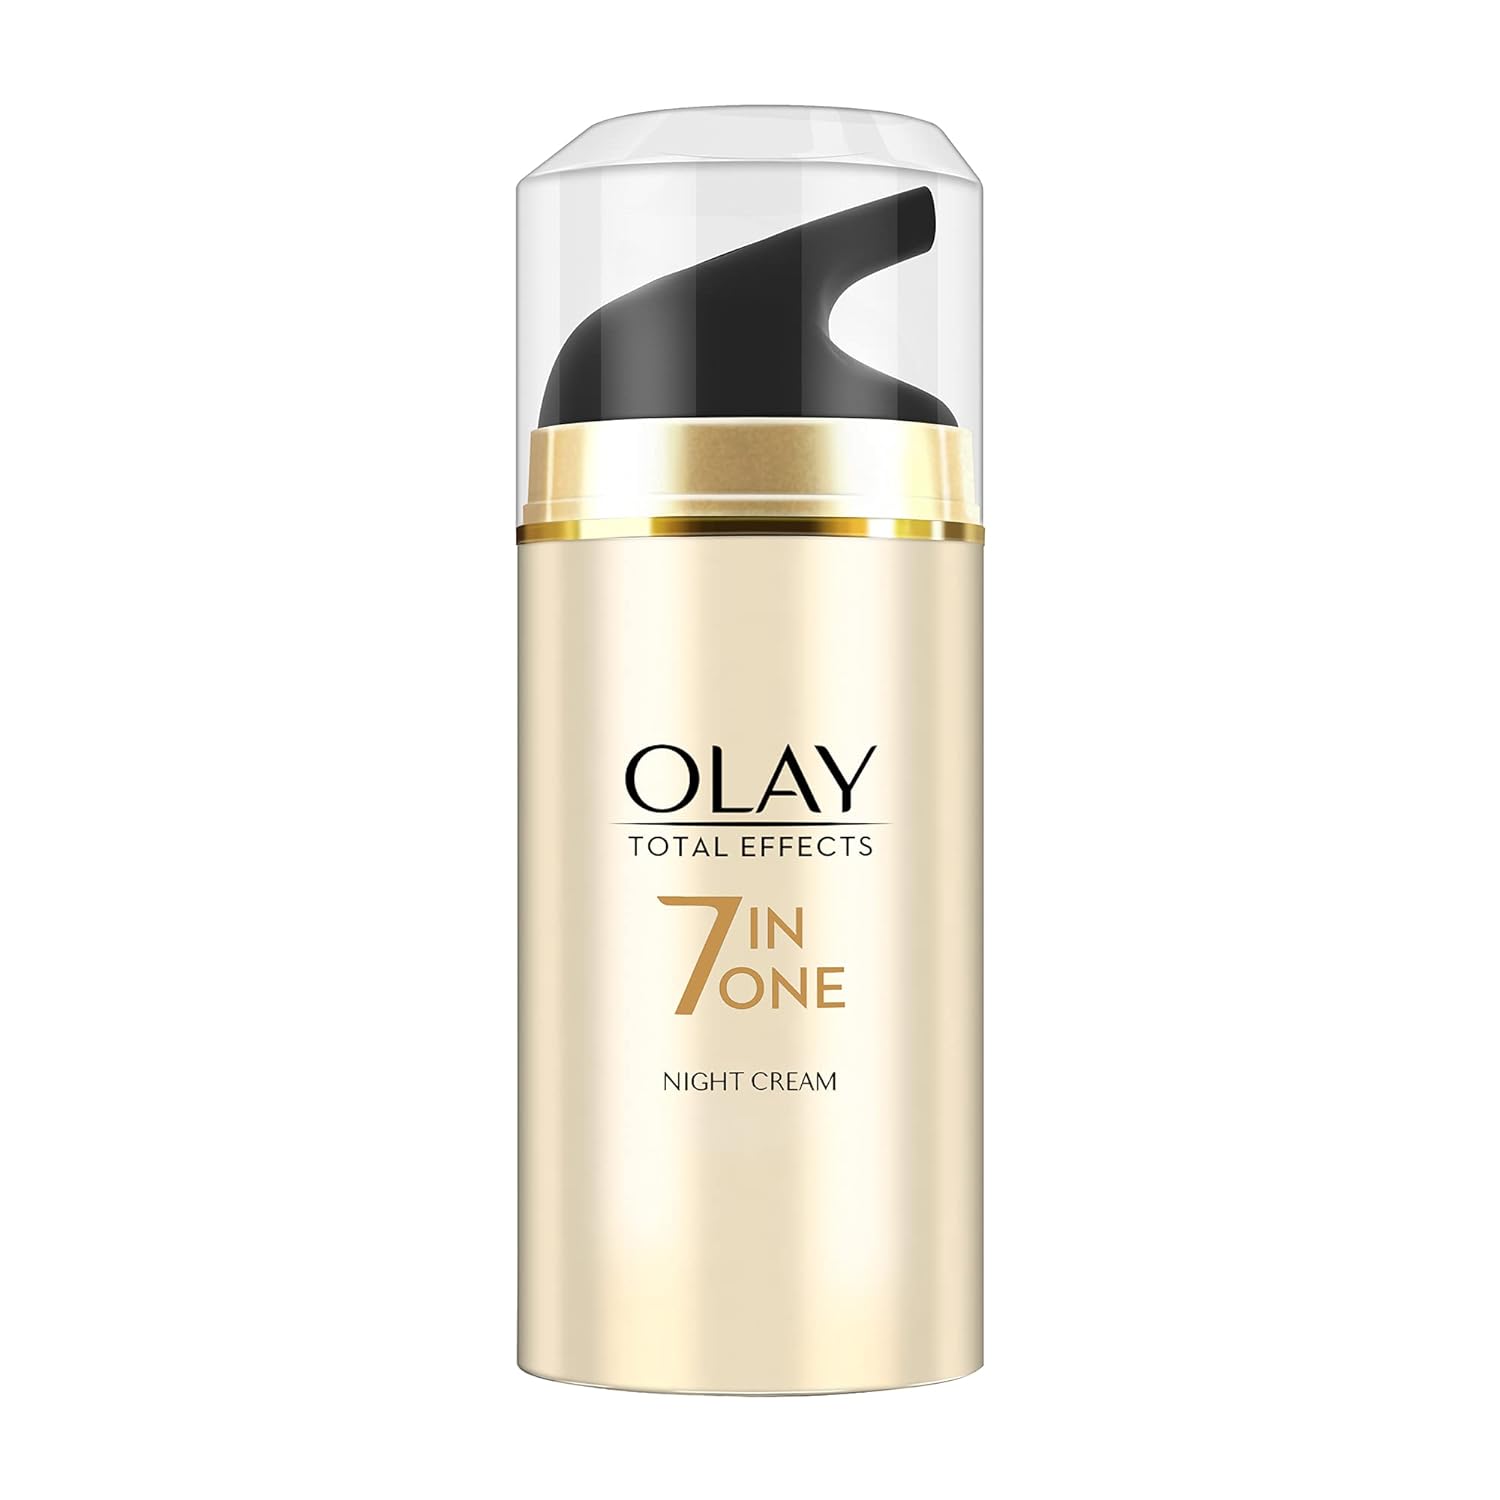 Olay Total Effect 7 In One Night Cream (20g)